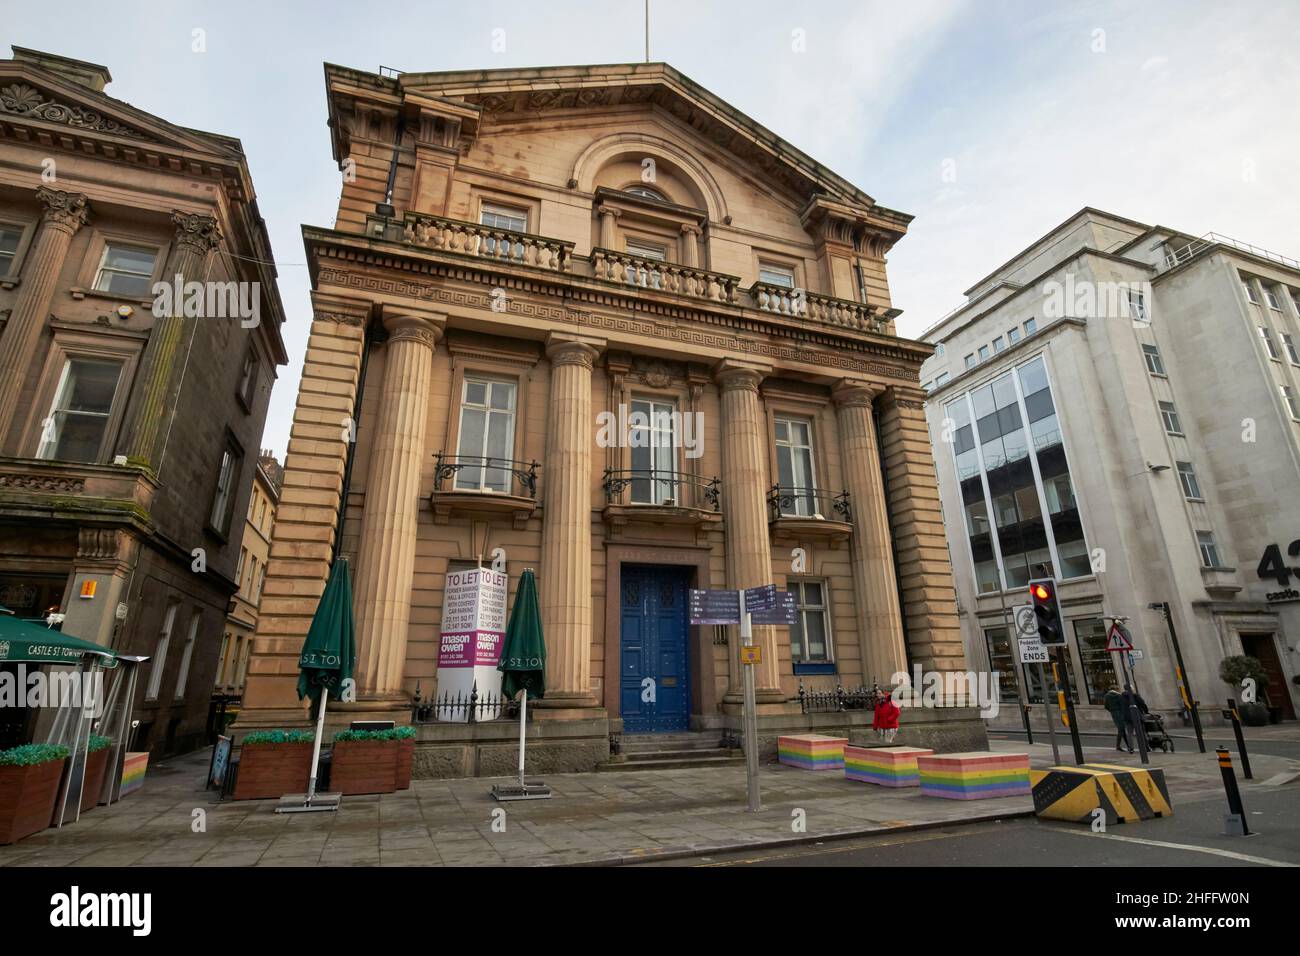 former bank of england building castle st Liverpool England UK Stock Photo